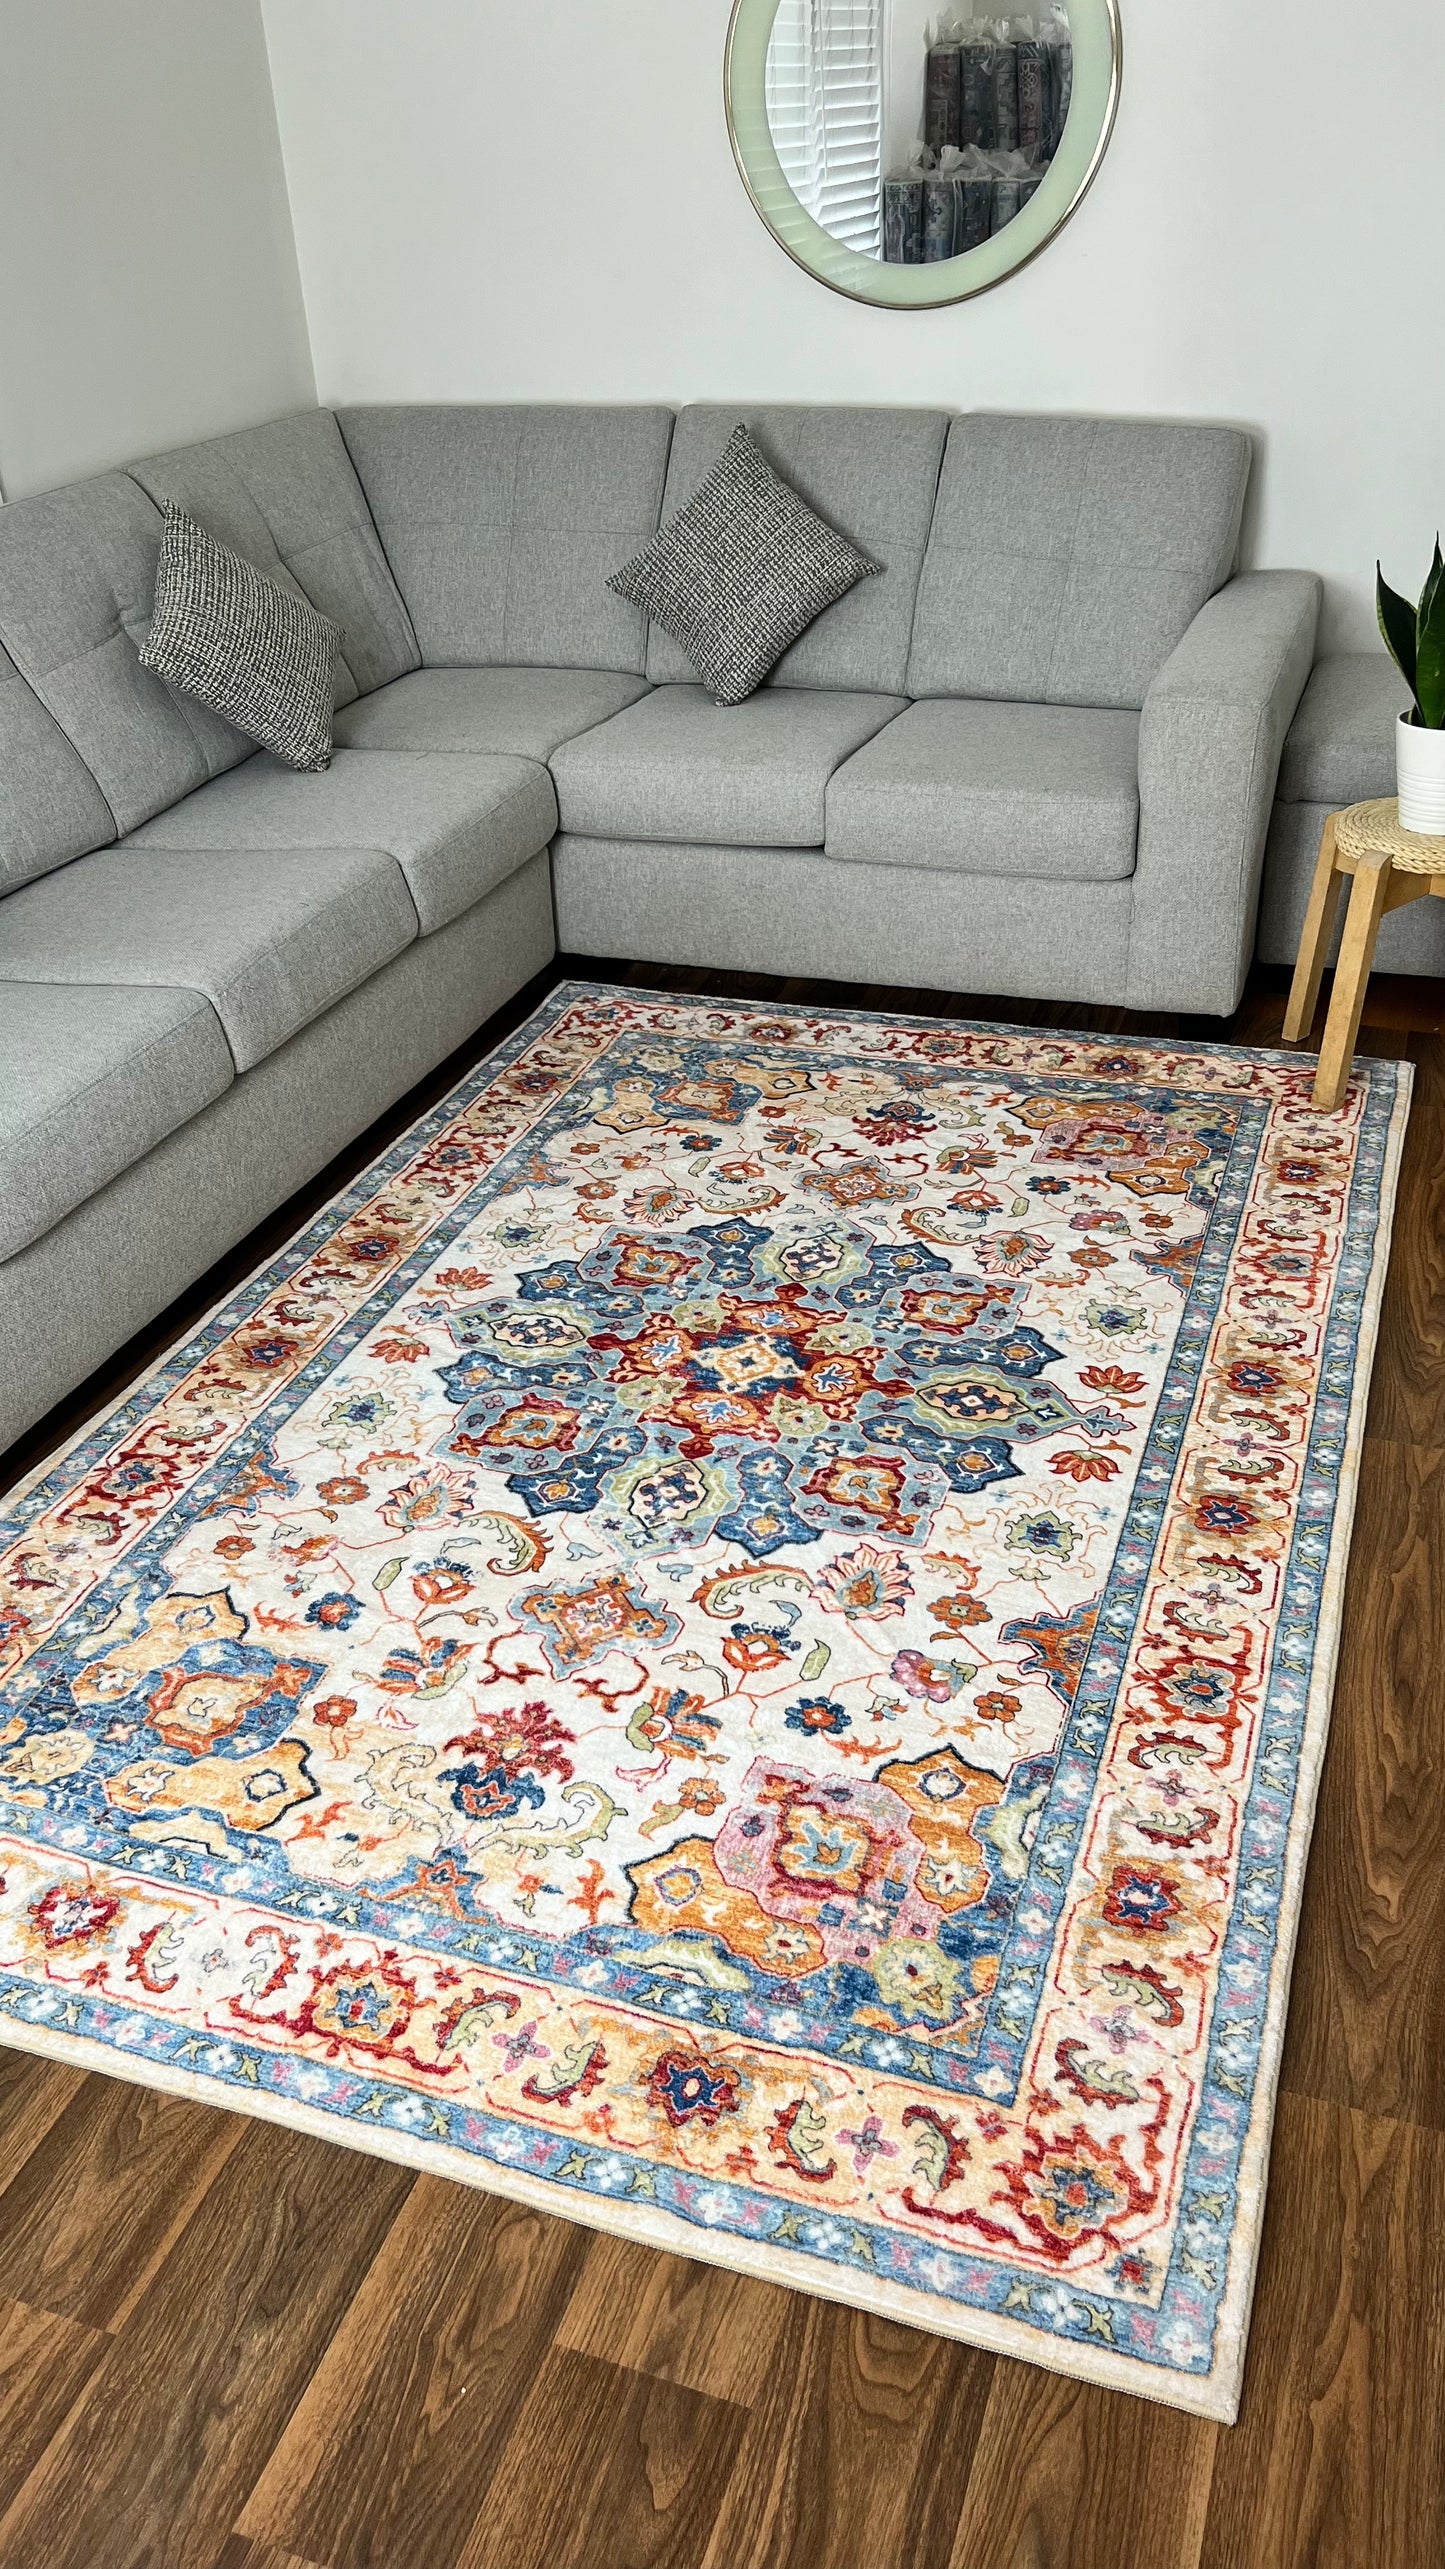 Modern Treasures: Persian Rugs Woven with Tradition